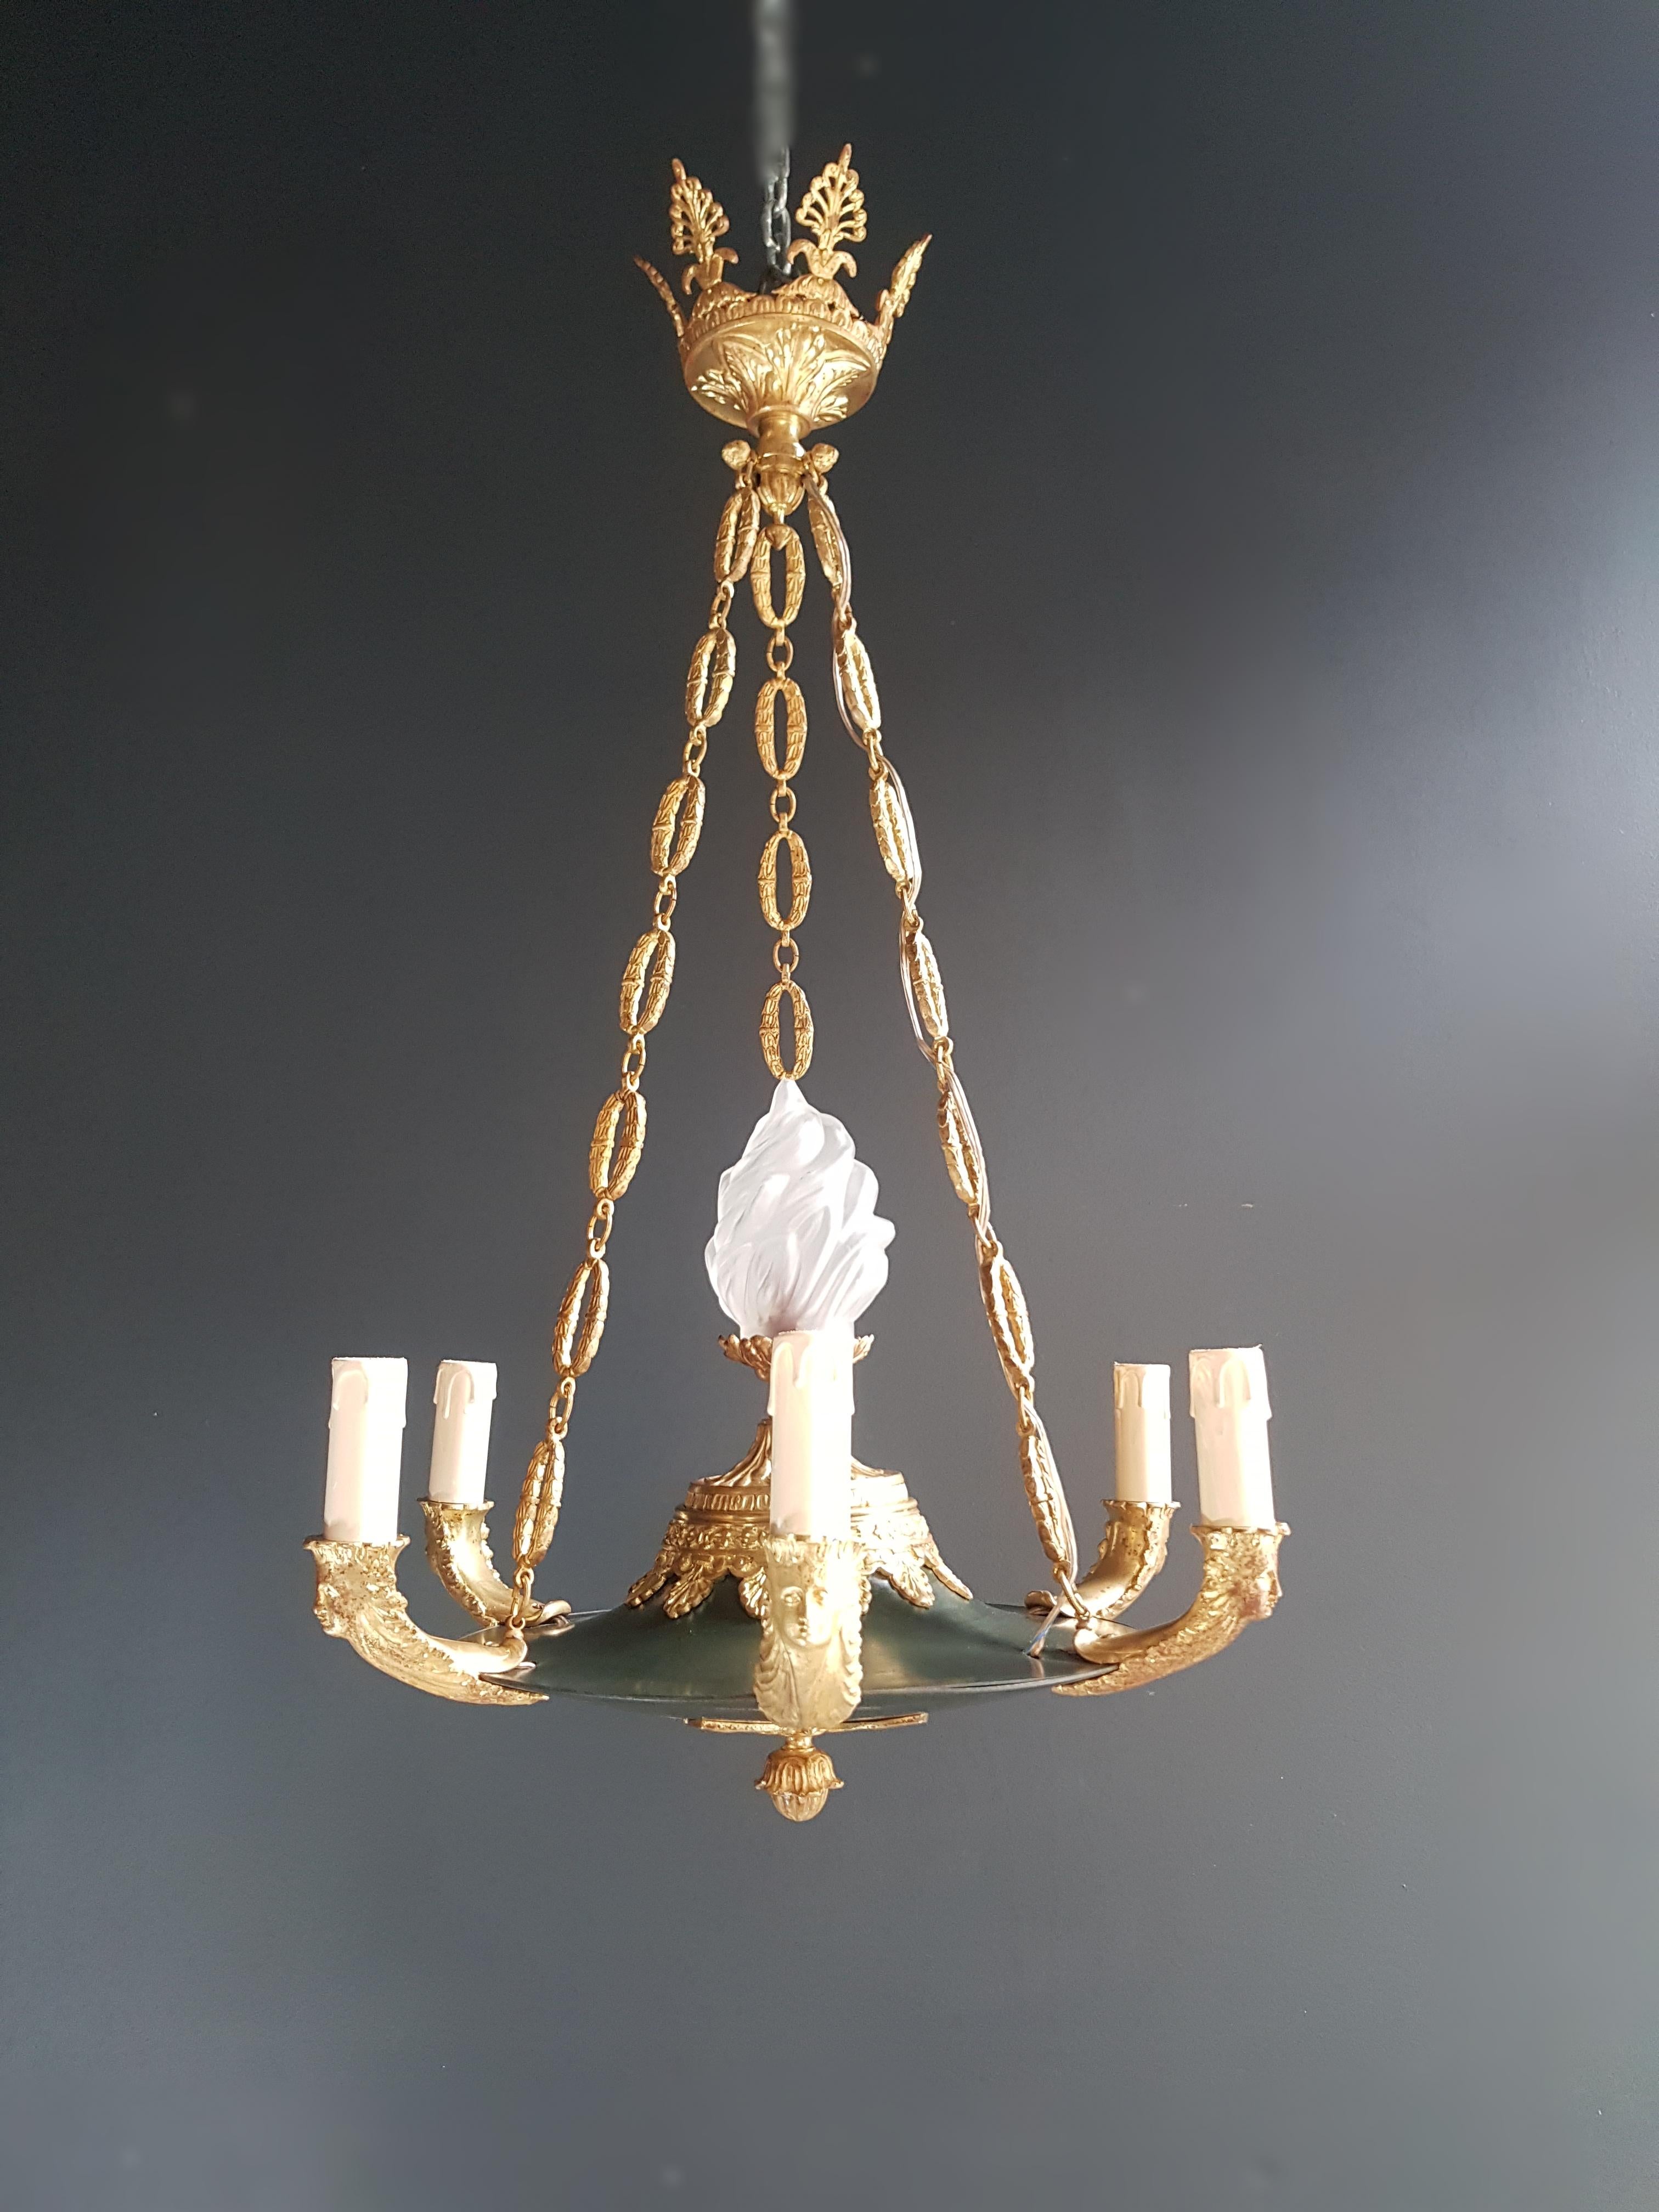 Fine Antique French Empire Lustre Neoclassical Patina Bronze Chandelier 8